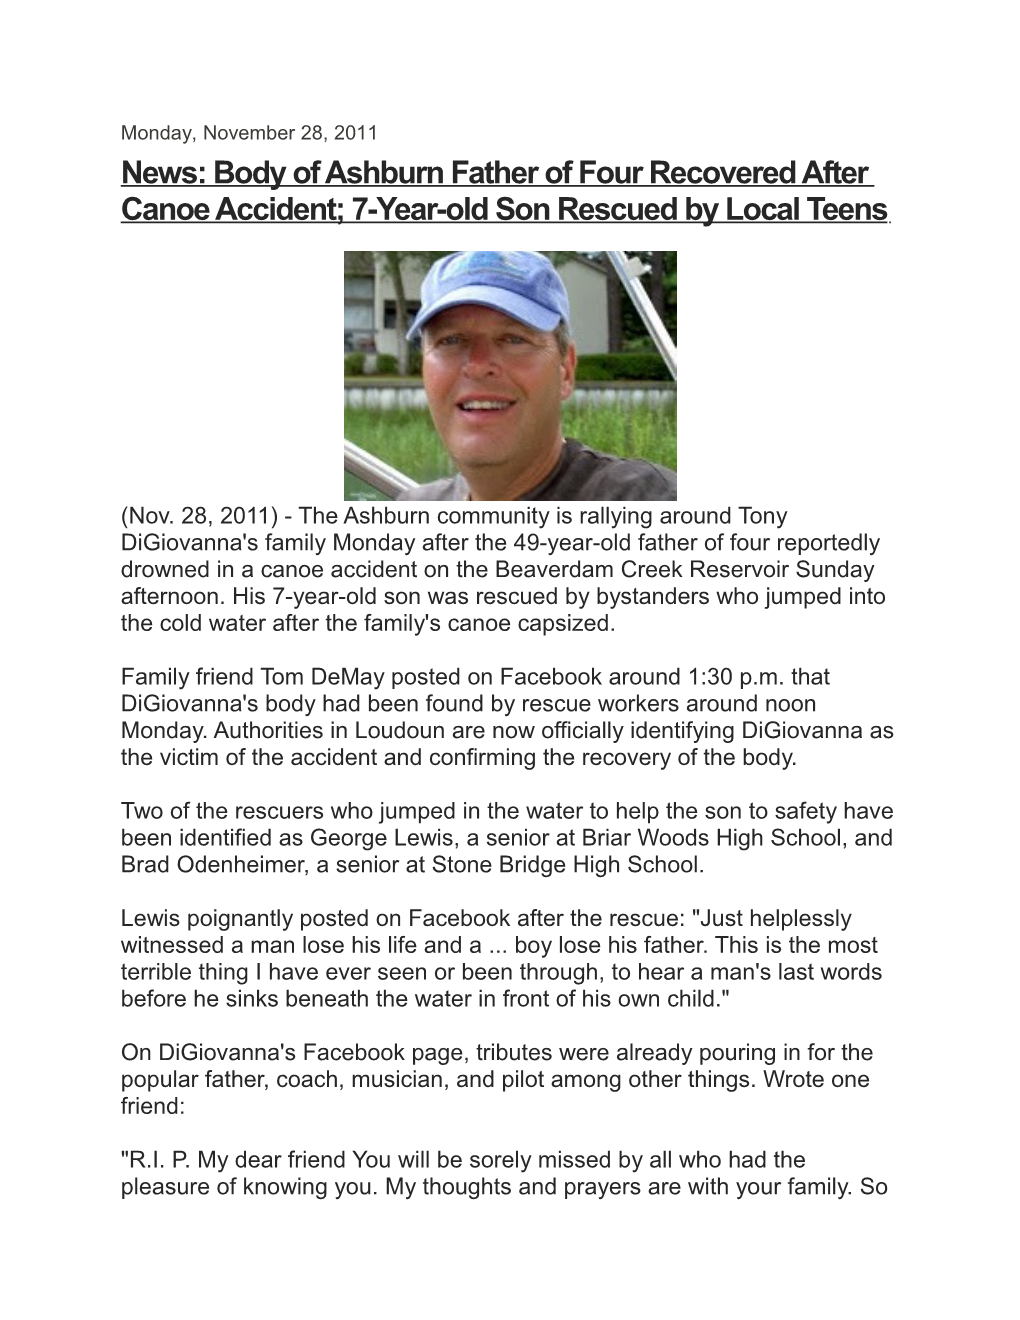 News: Body of Ashburn Father of Four Recovered After Canoe Accident; 7-Year-Old Son Rescued